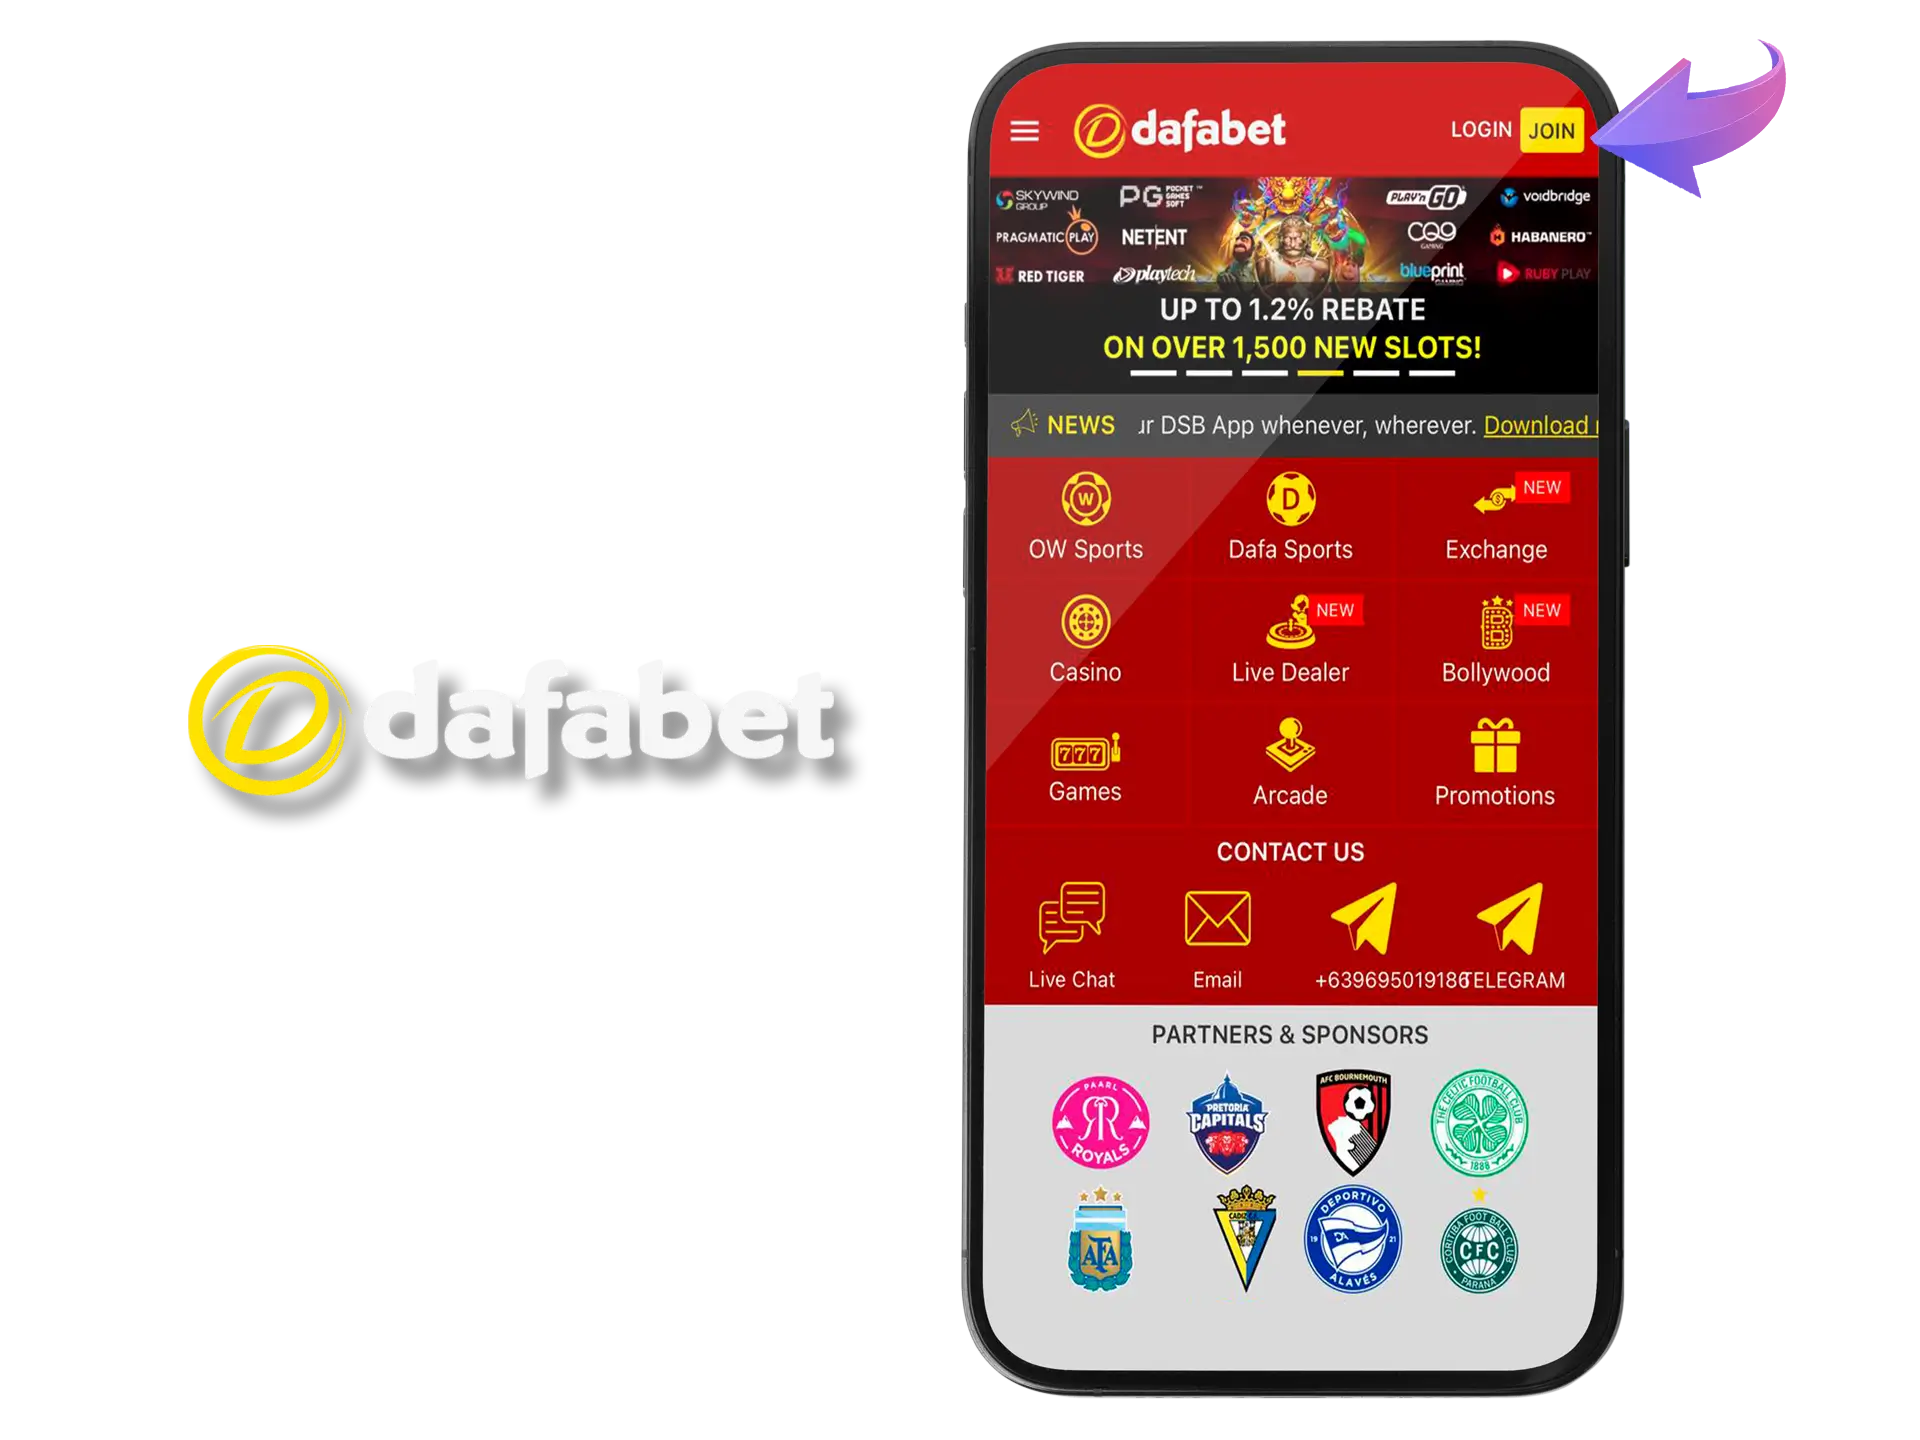 Find the registration button on the Dafabet website.